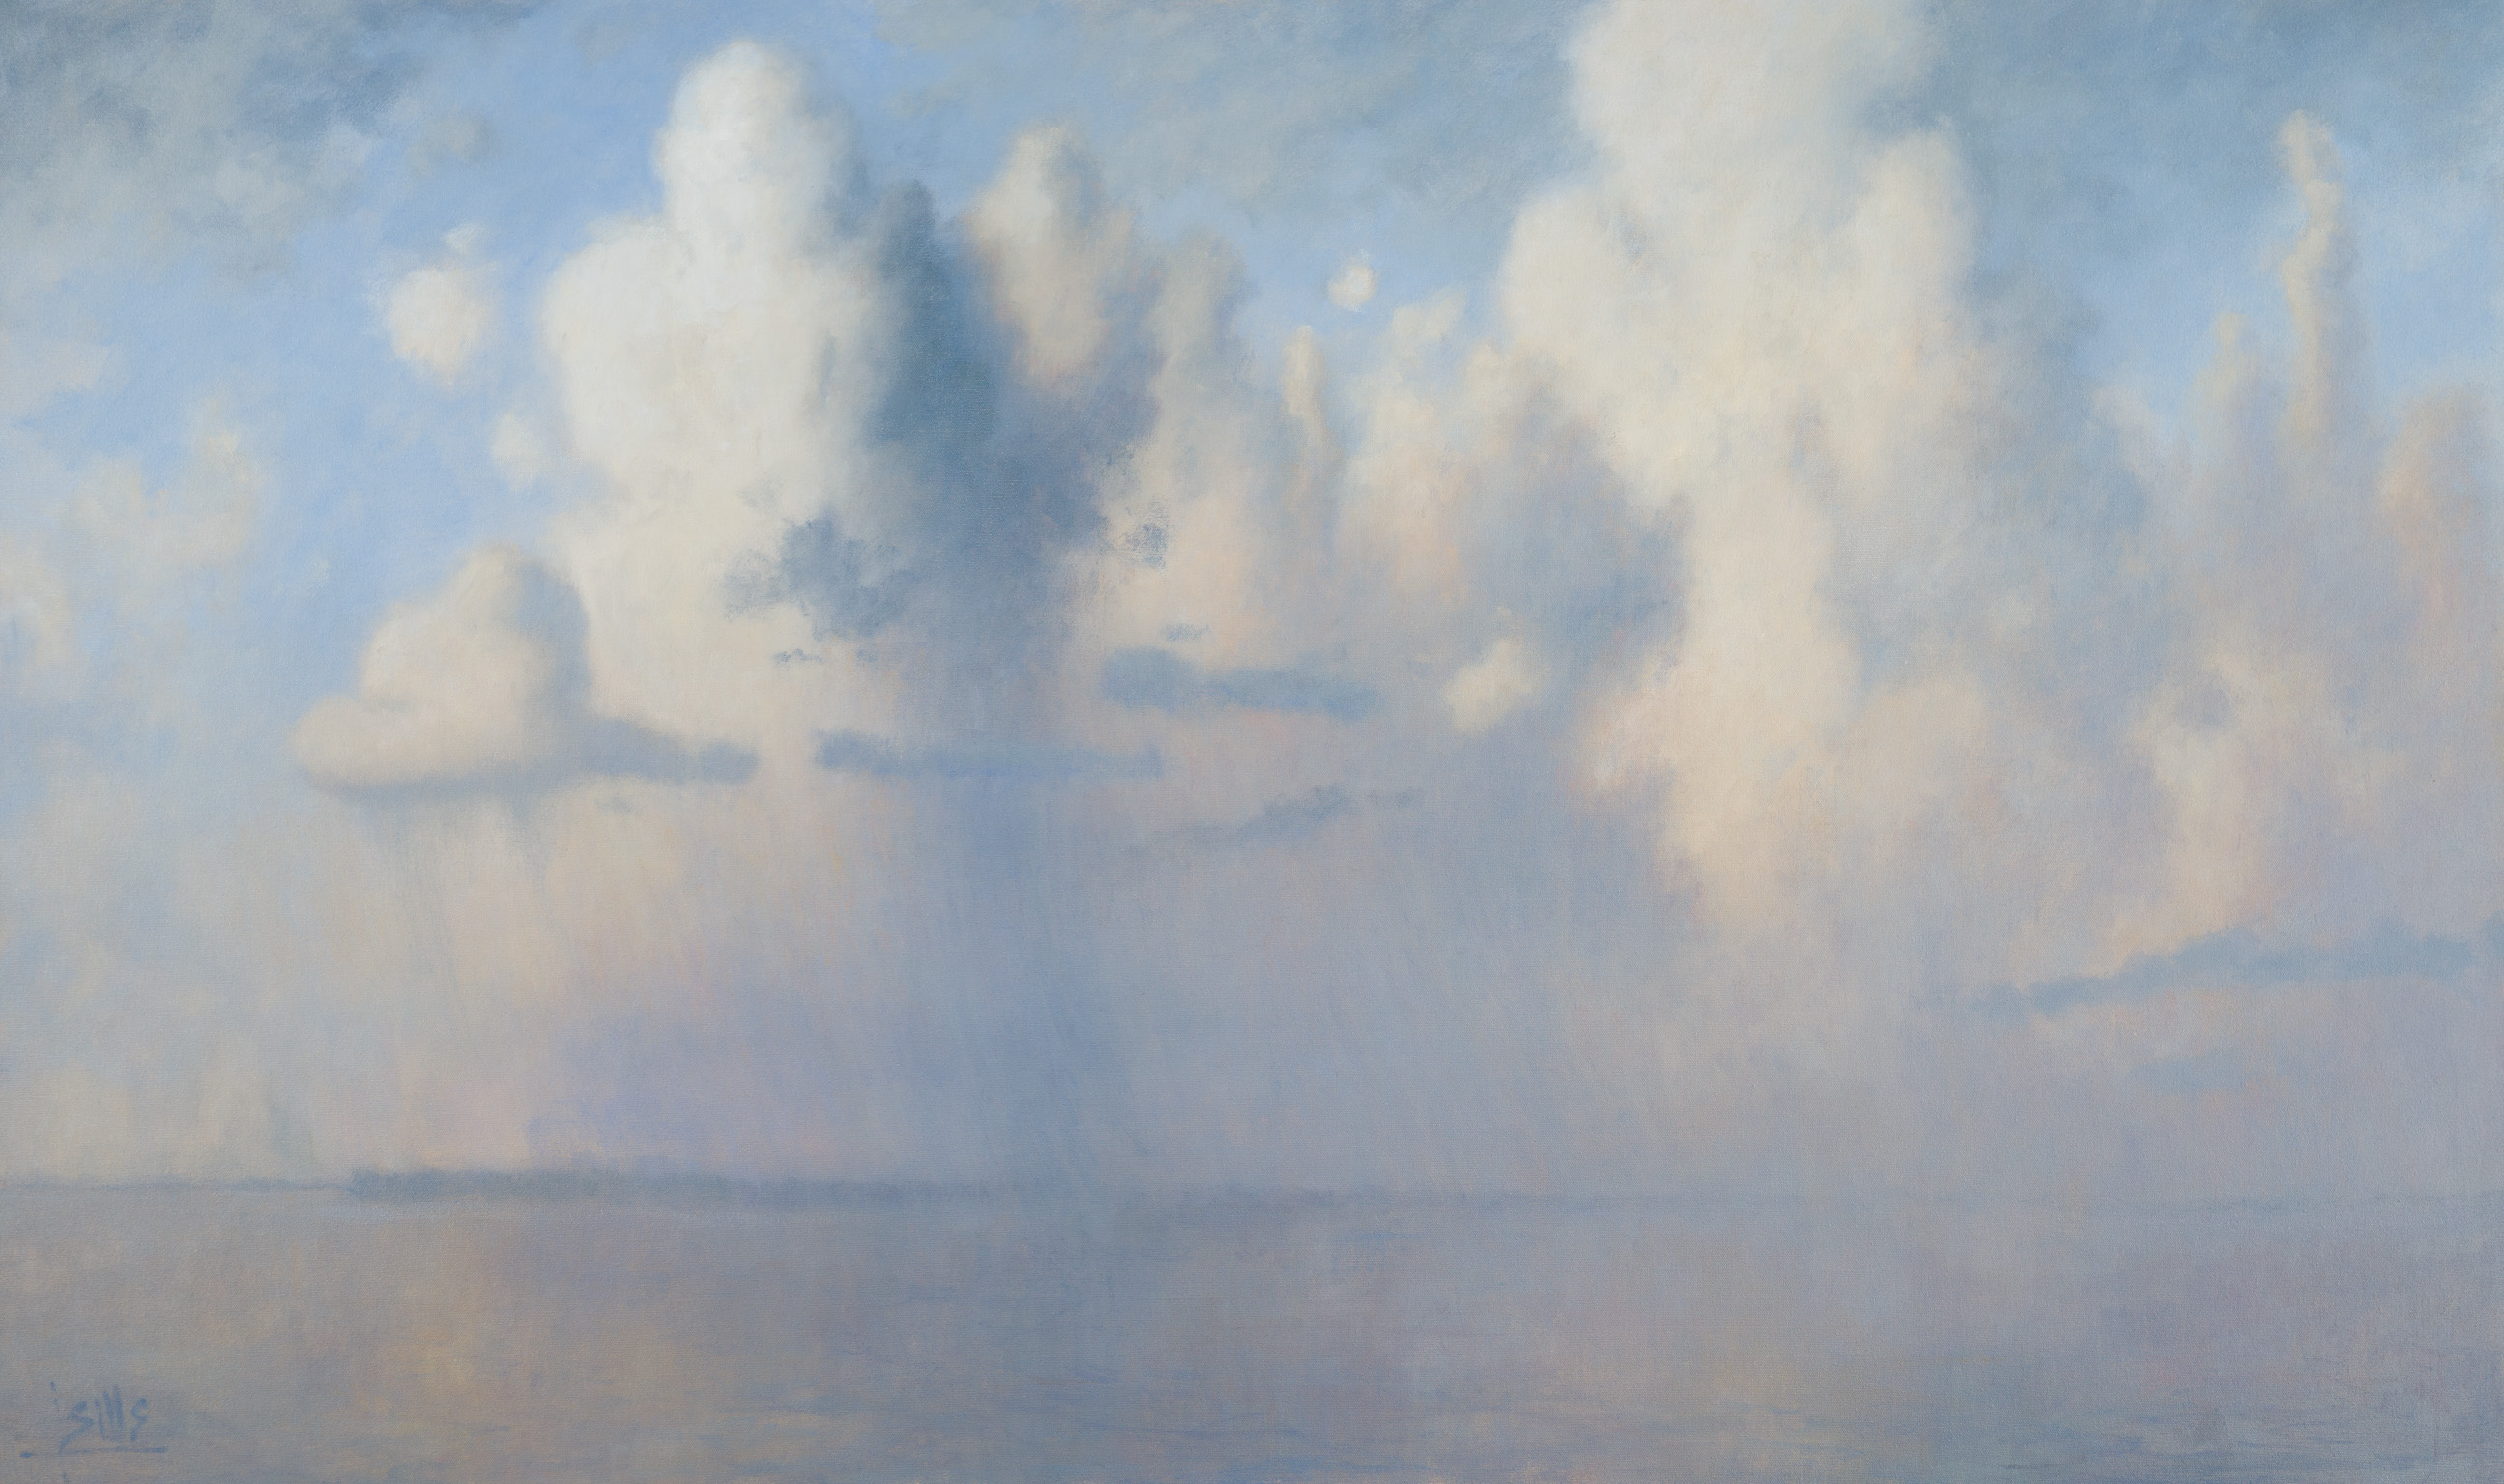 John Sills, "Rising Clouds", Oil on Canvas, 36 x 60 inches